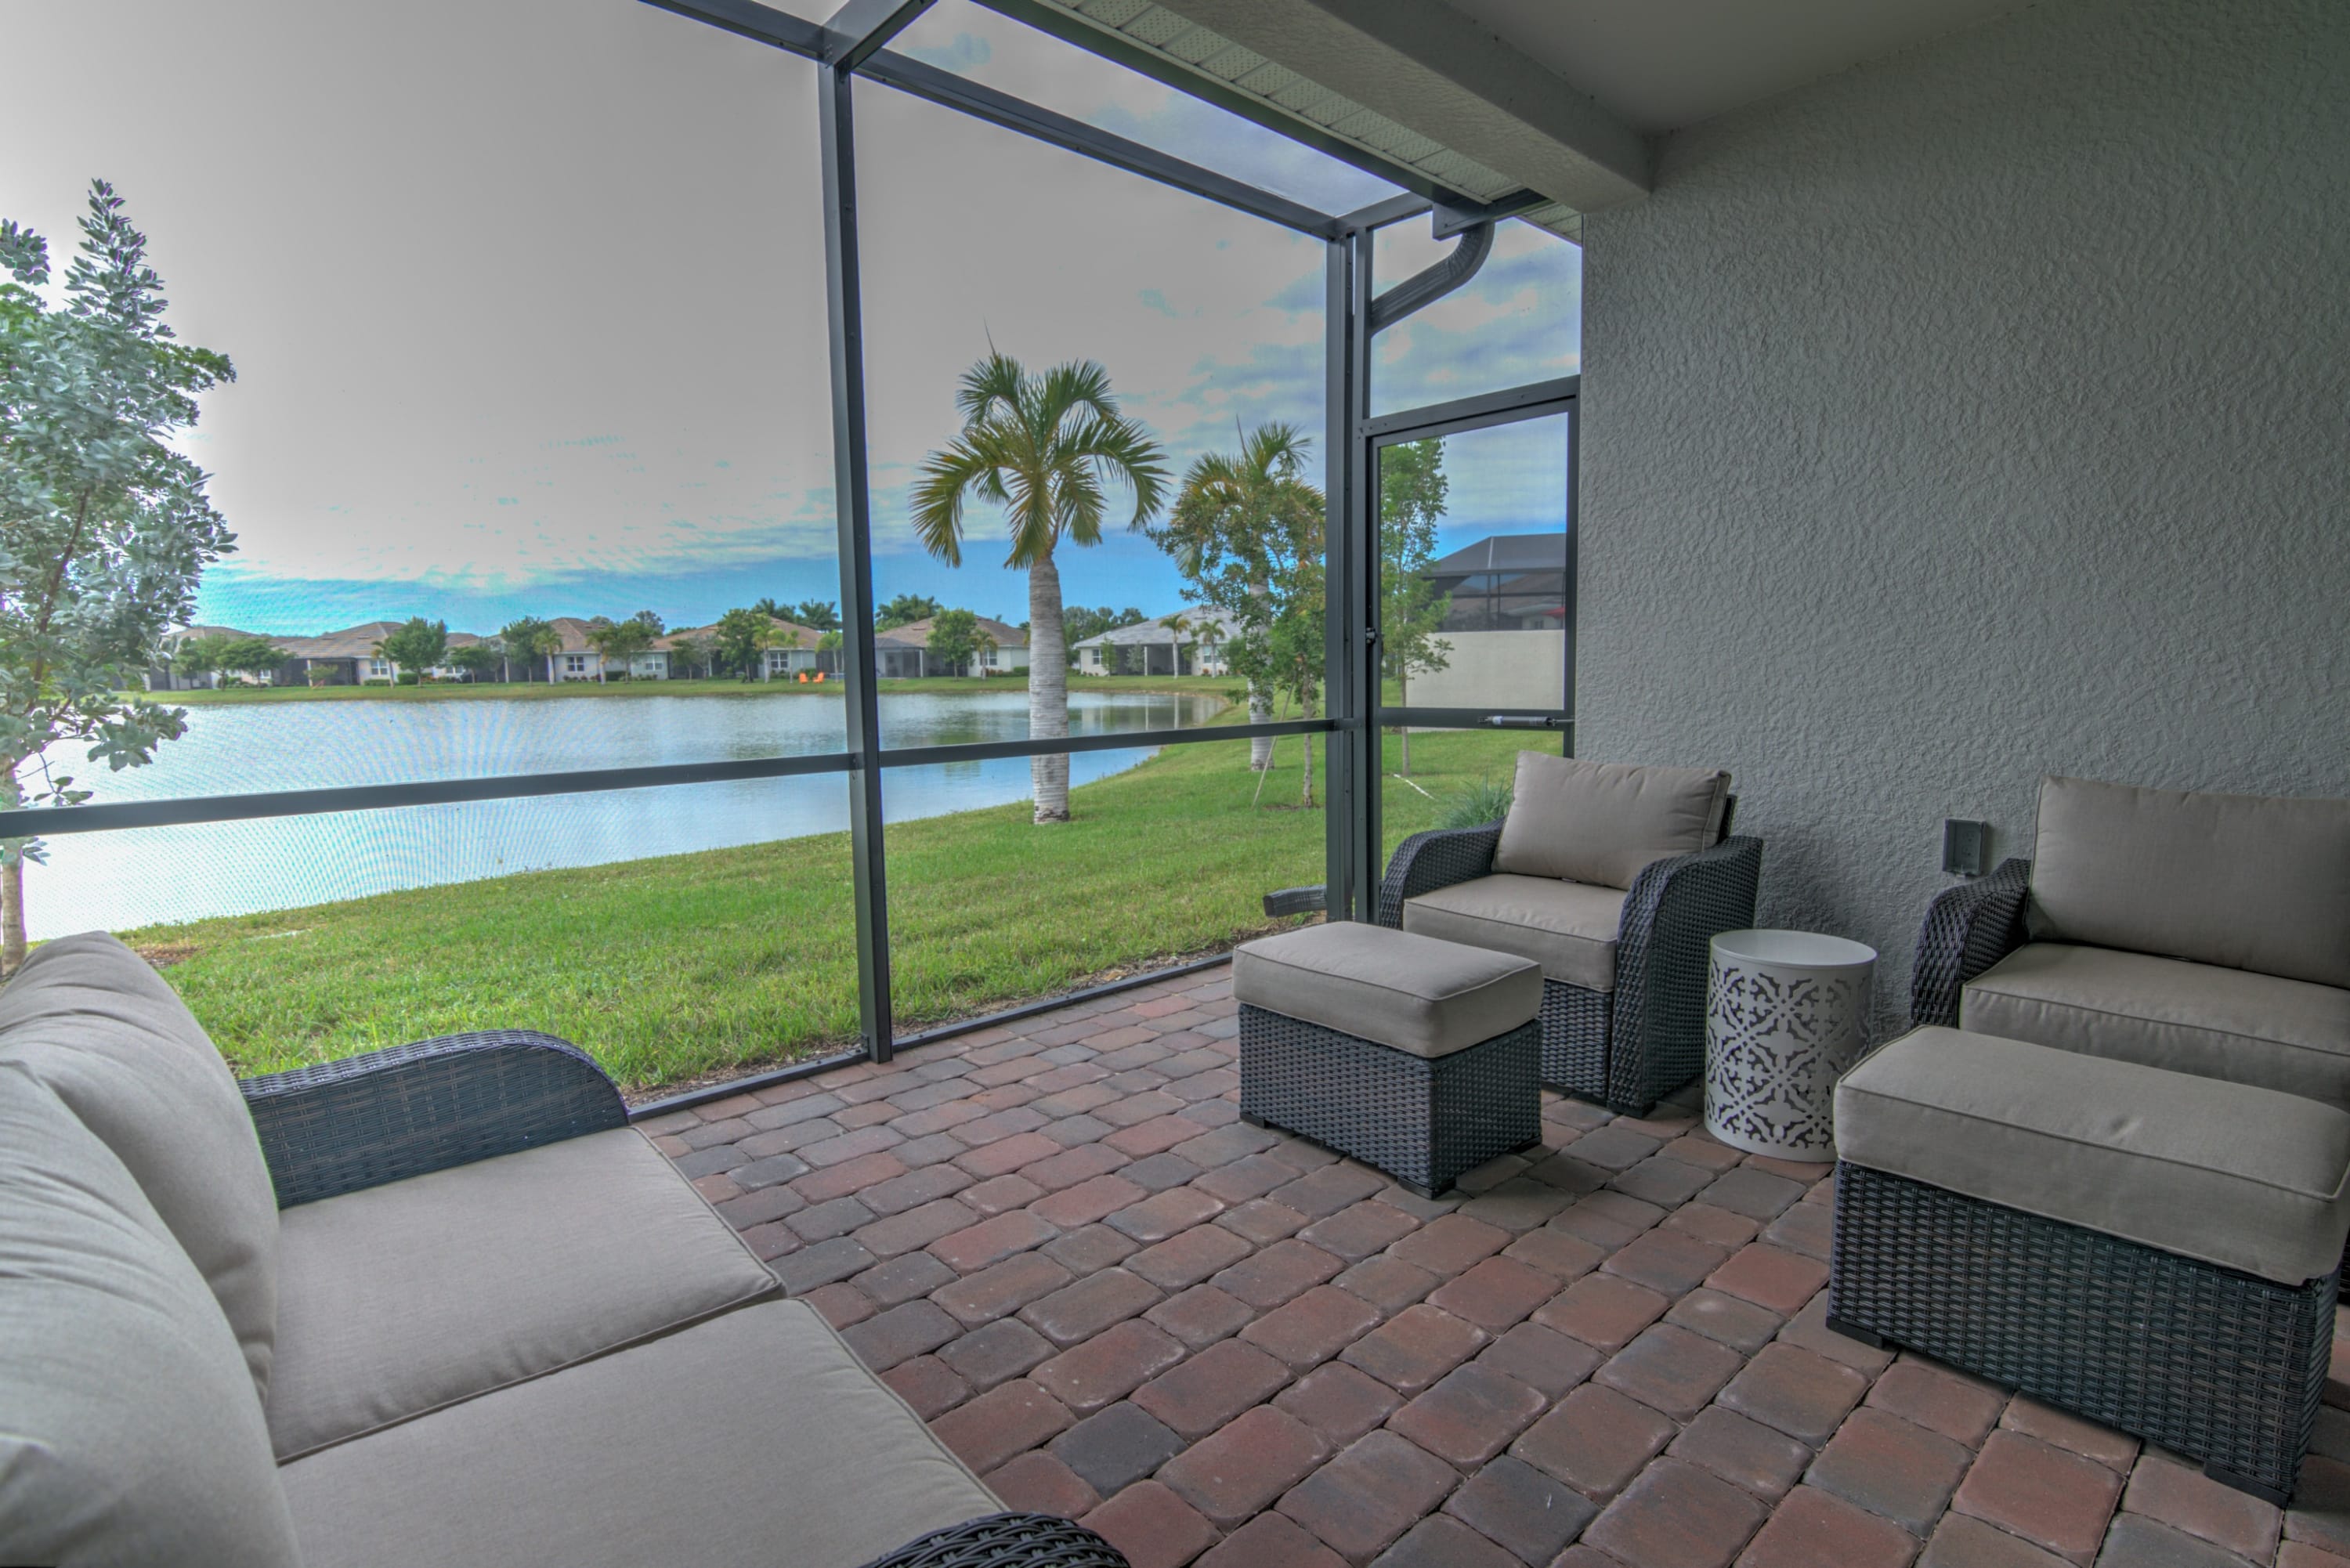 Property Image 1 - Fabulous 2 Bedroom and Den Villa W/ Lake Views in Amenities Rich Naples Reserve